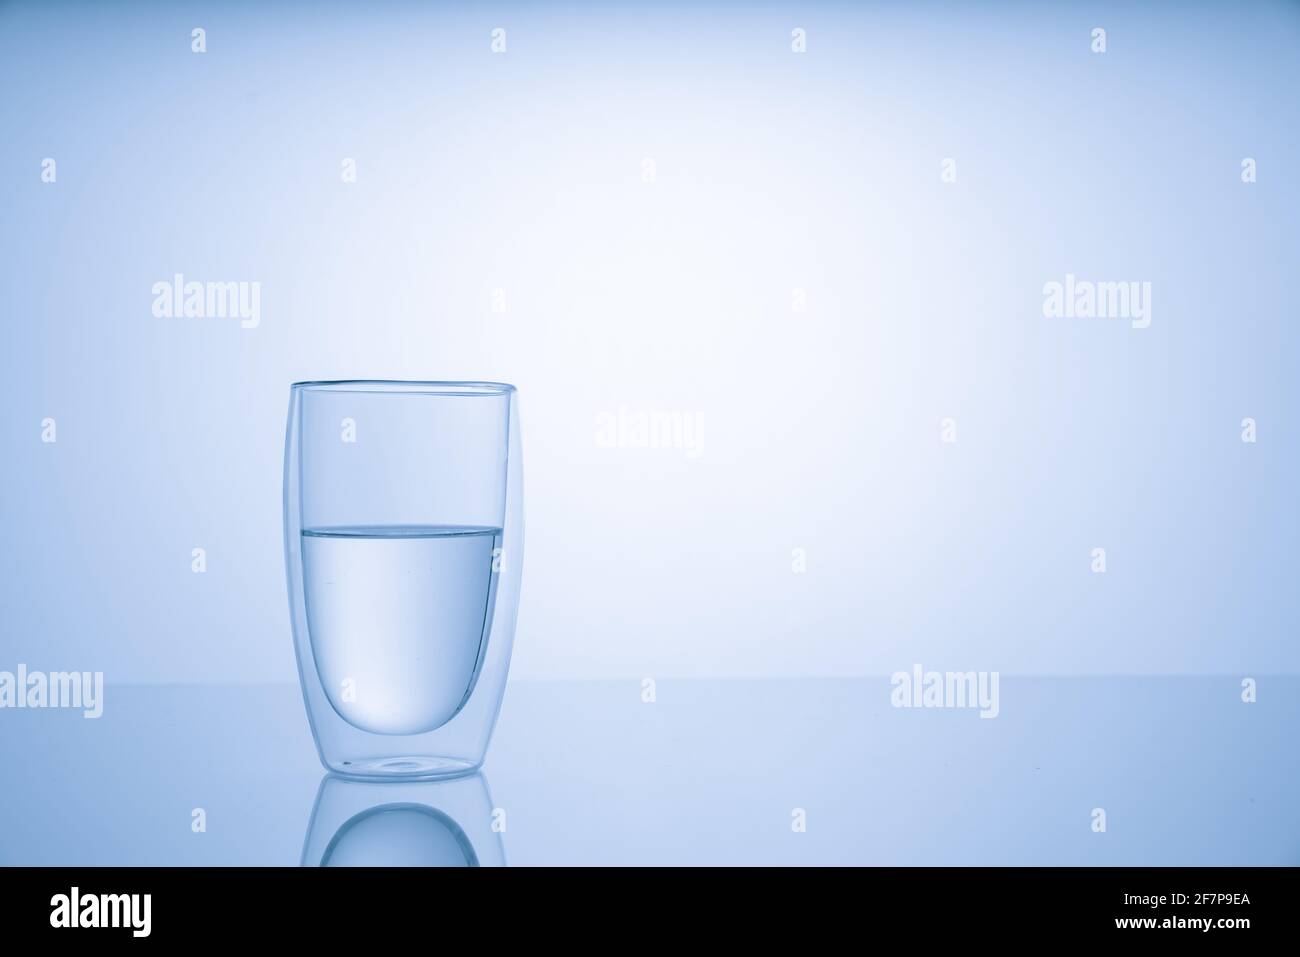 Pitcher with drinking water and a glass with a drink, blue tone Stock Photo